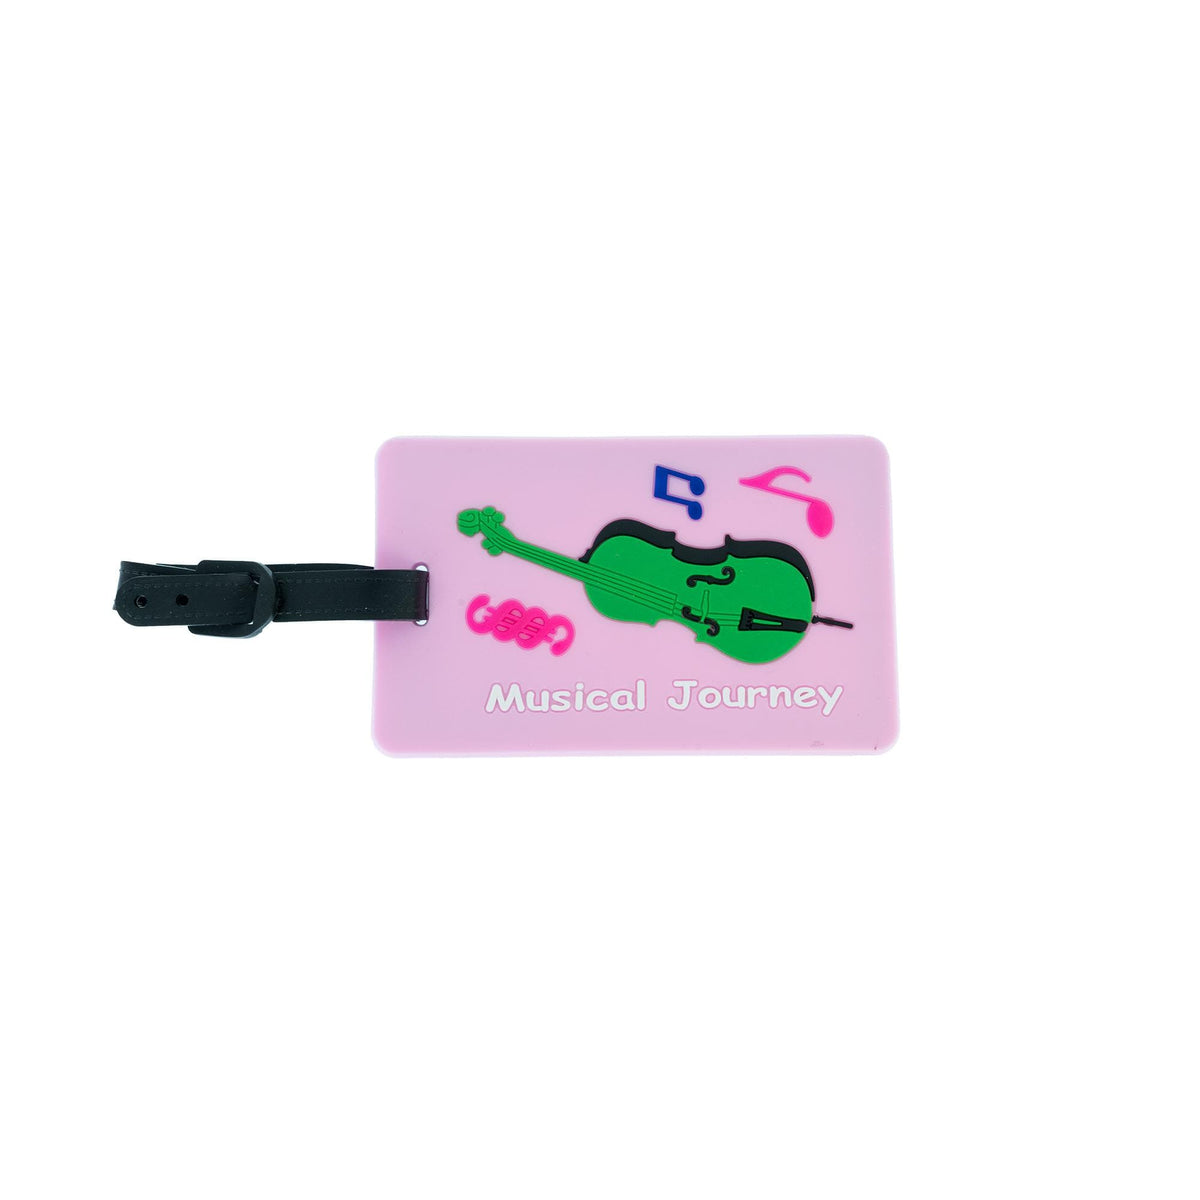 Musical Journey Luggage Tag - Light Pink